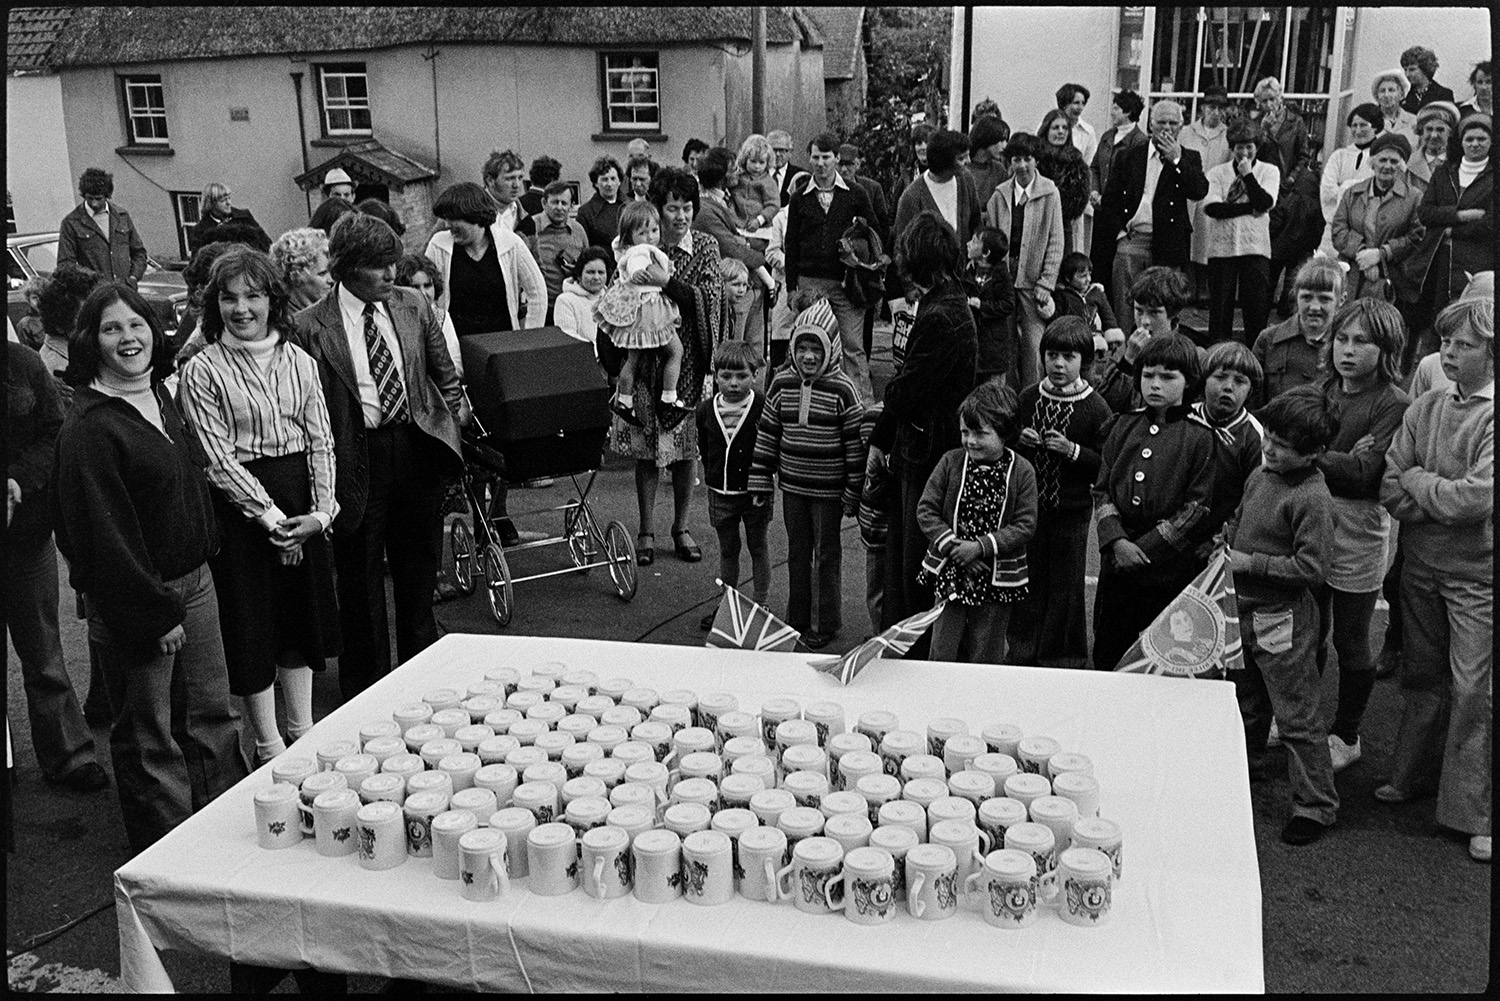 Presentation of Jubilee mugs, crowd in front of mugs set out on table, man presenting them.
[A group of men, women and children standing in Atherington village square around a table with presentation mugs to celebrate the Silver Jubilee of Queen Elizabeth II.]